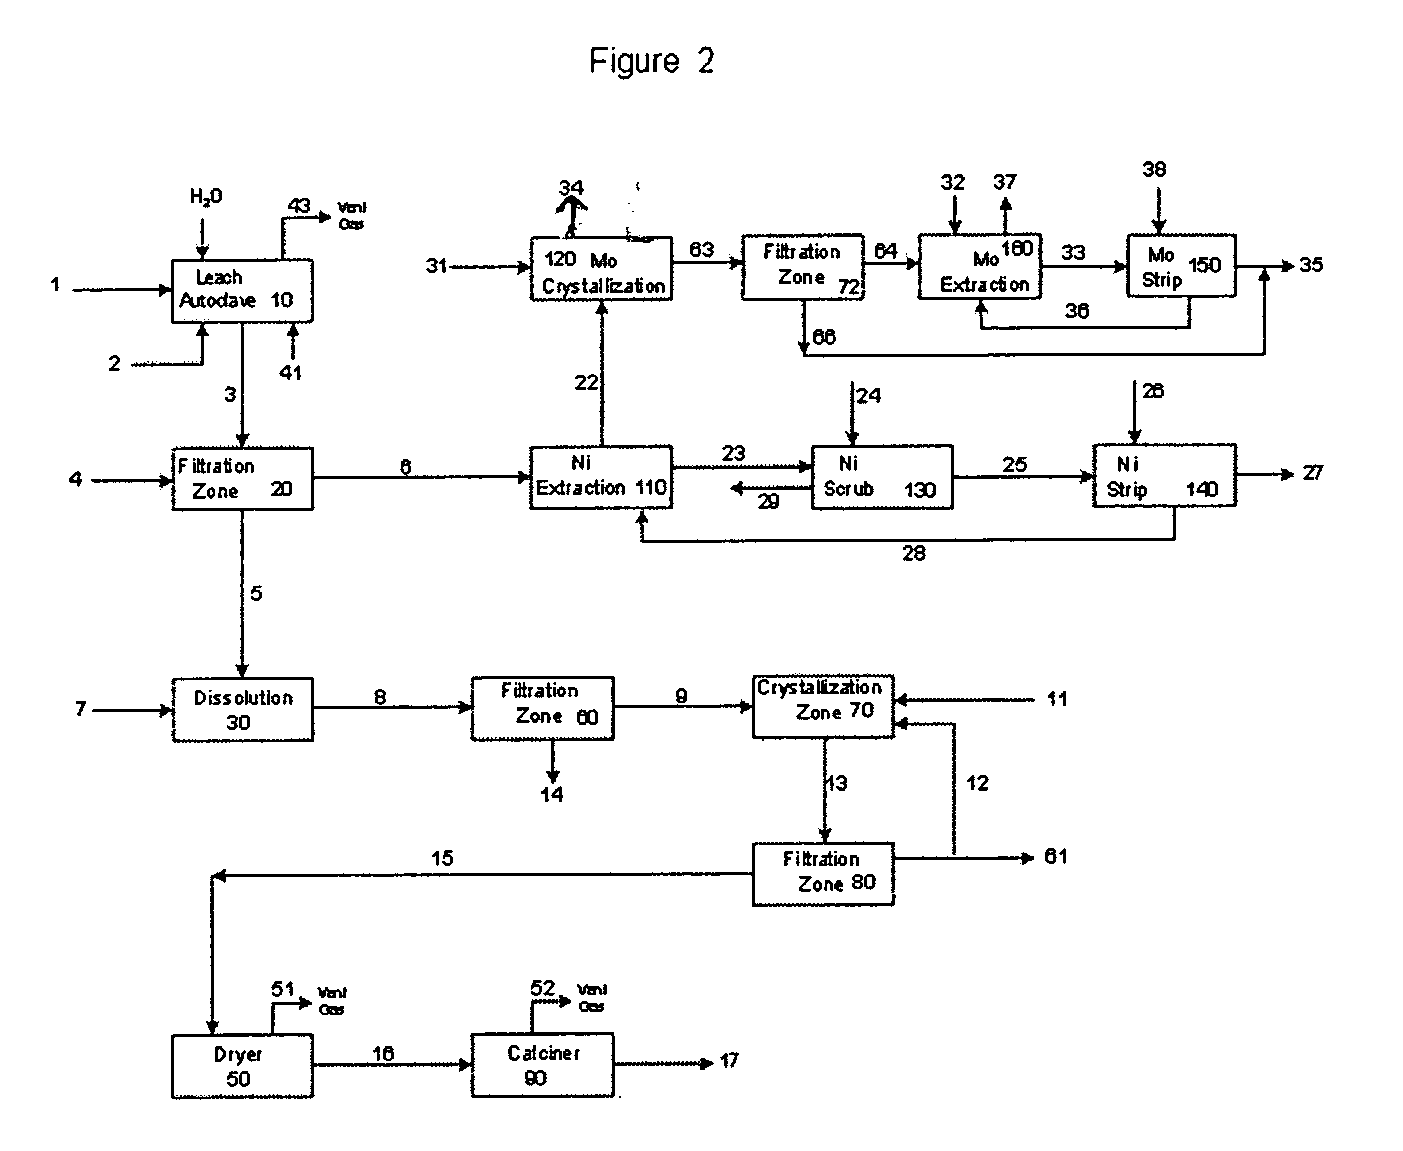 Process for metals recovery from spent catalyst